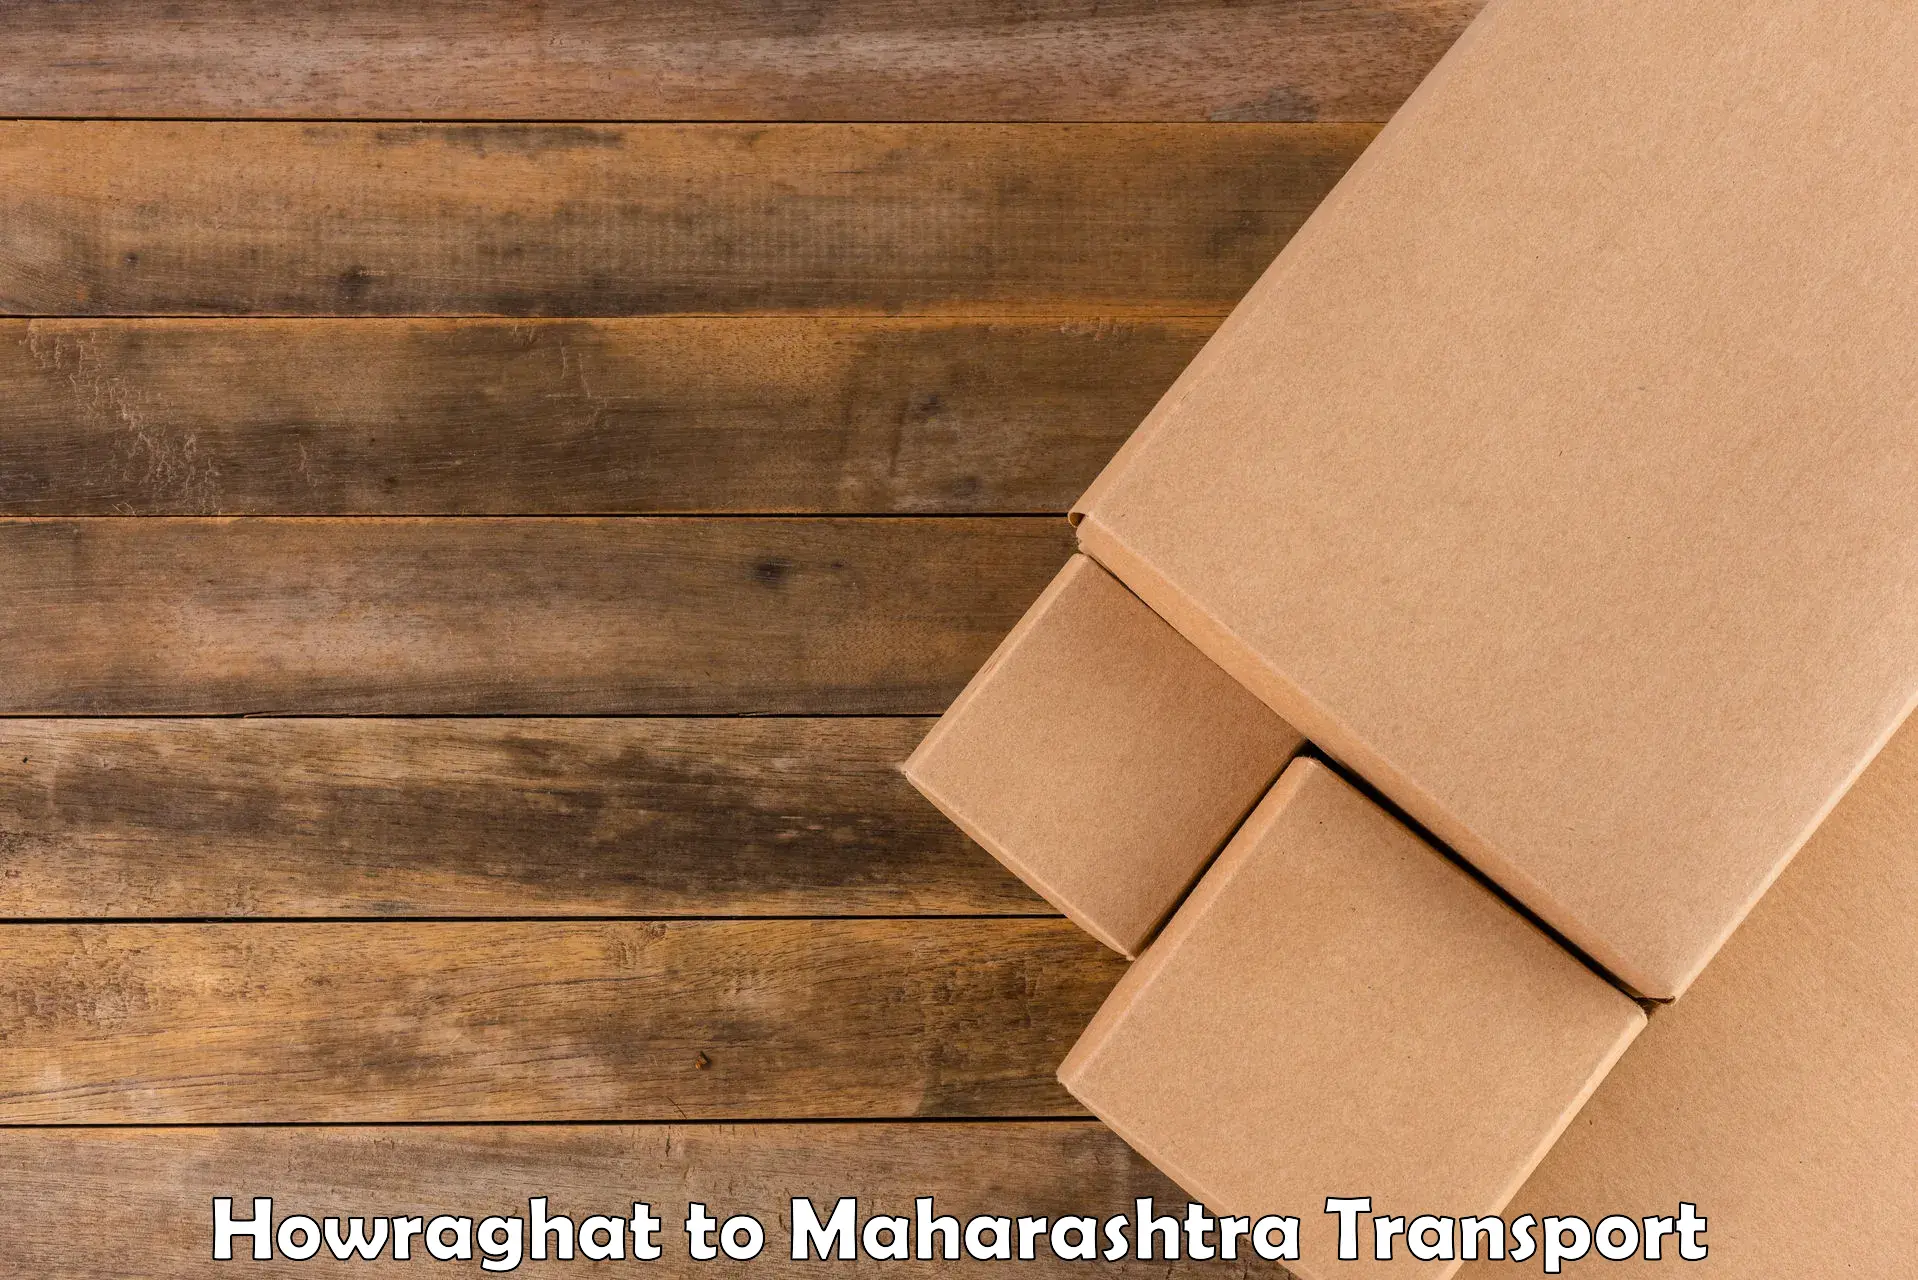 Air freight transport services Howraghat to Parli